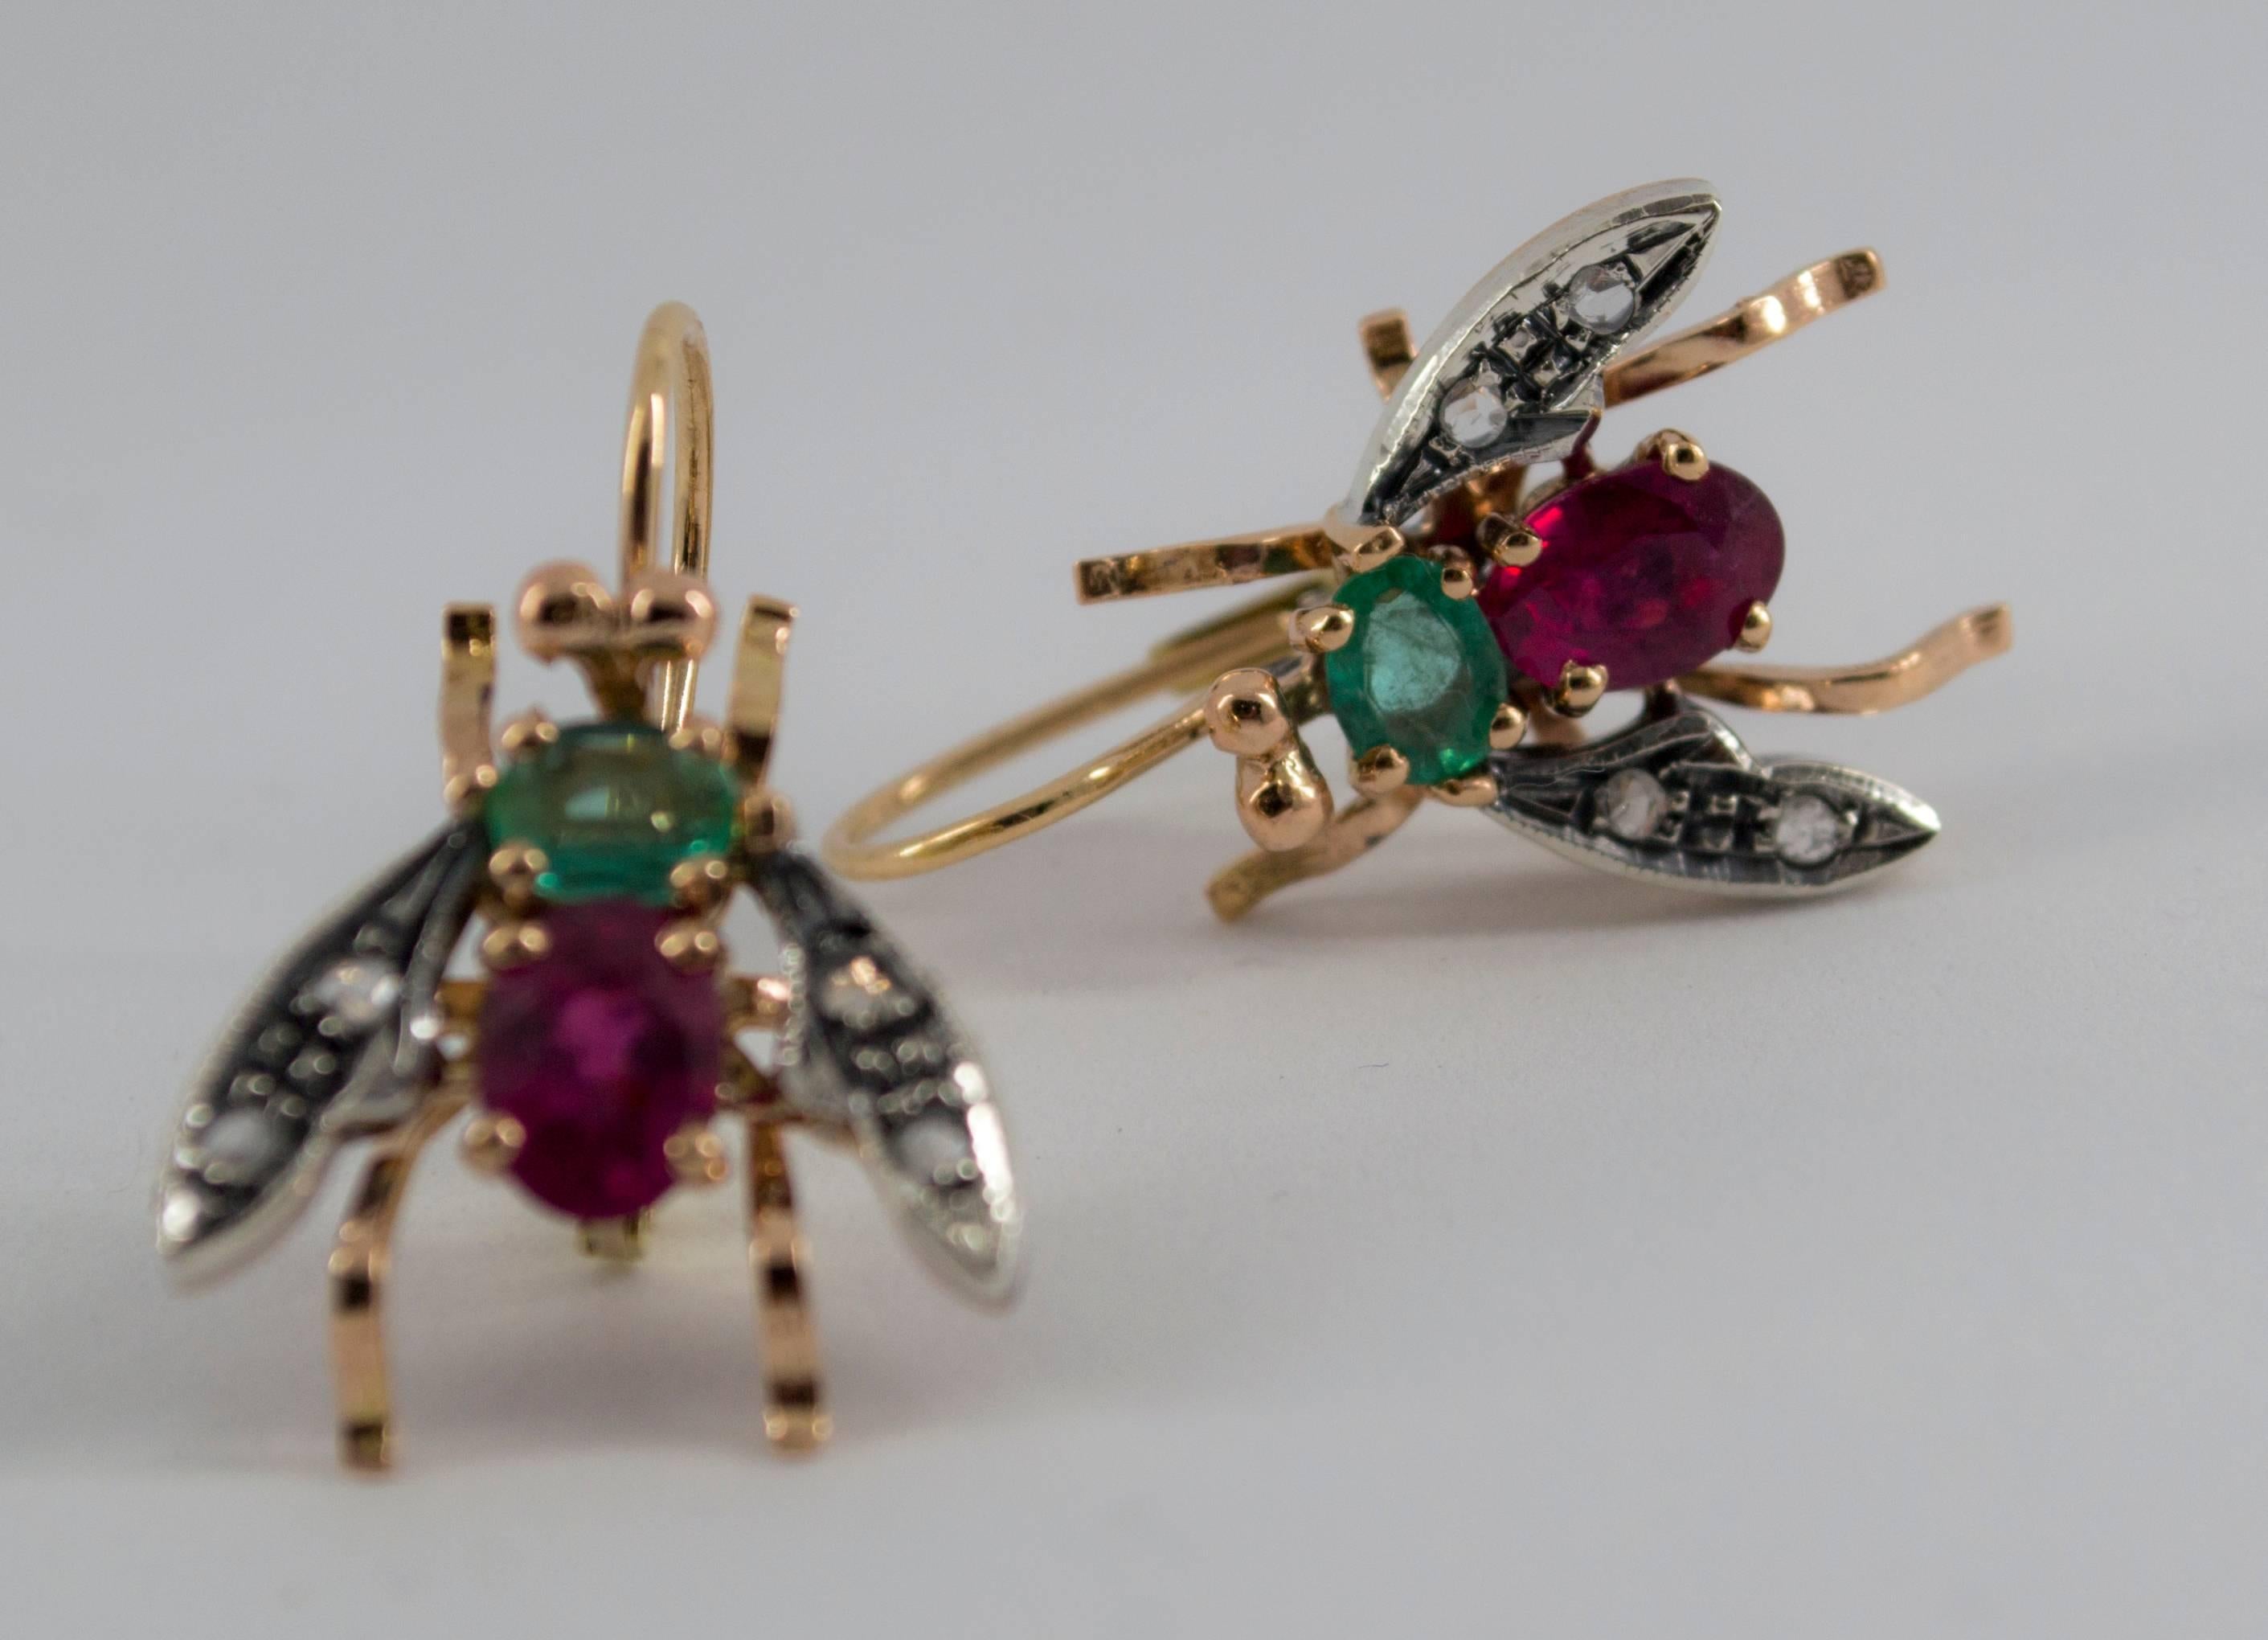 One of the most iconic earrings made by Luigi Ferrara: his flies earrings.
These Earrings are made of 9K Yellow Gold and Sterling Silver.
These Earrings have 0.10 Carats of White Diamonds.
These Earrings have 3.00 Carats of Ruby and Emerald, but